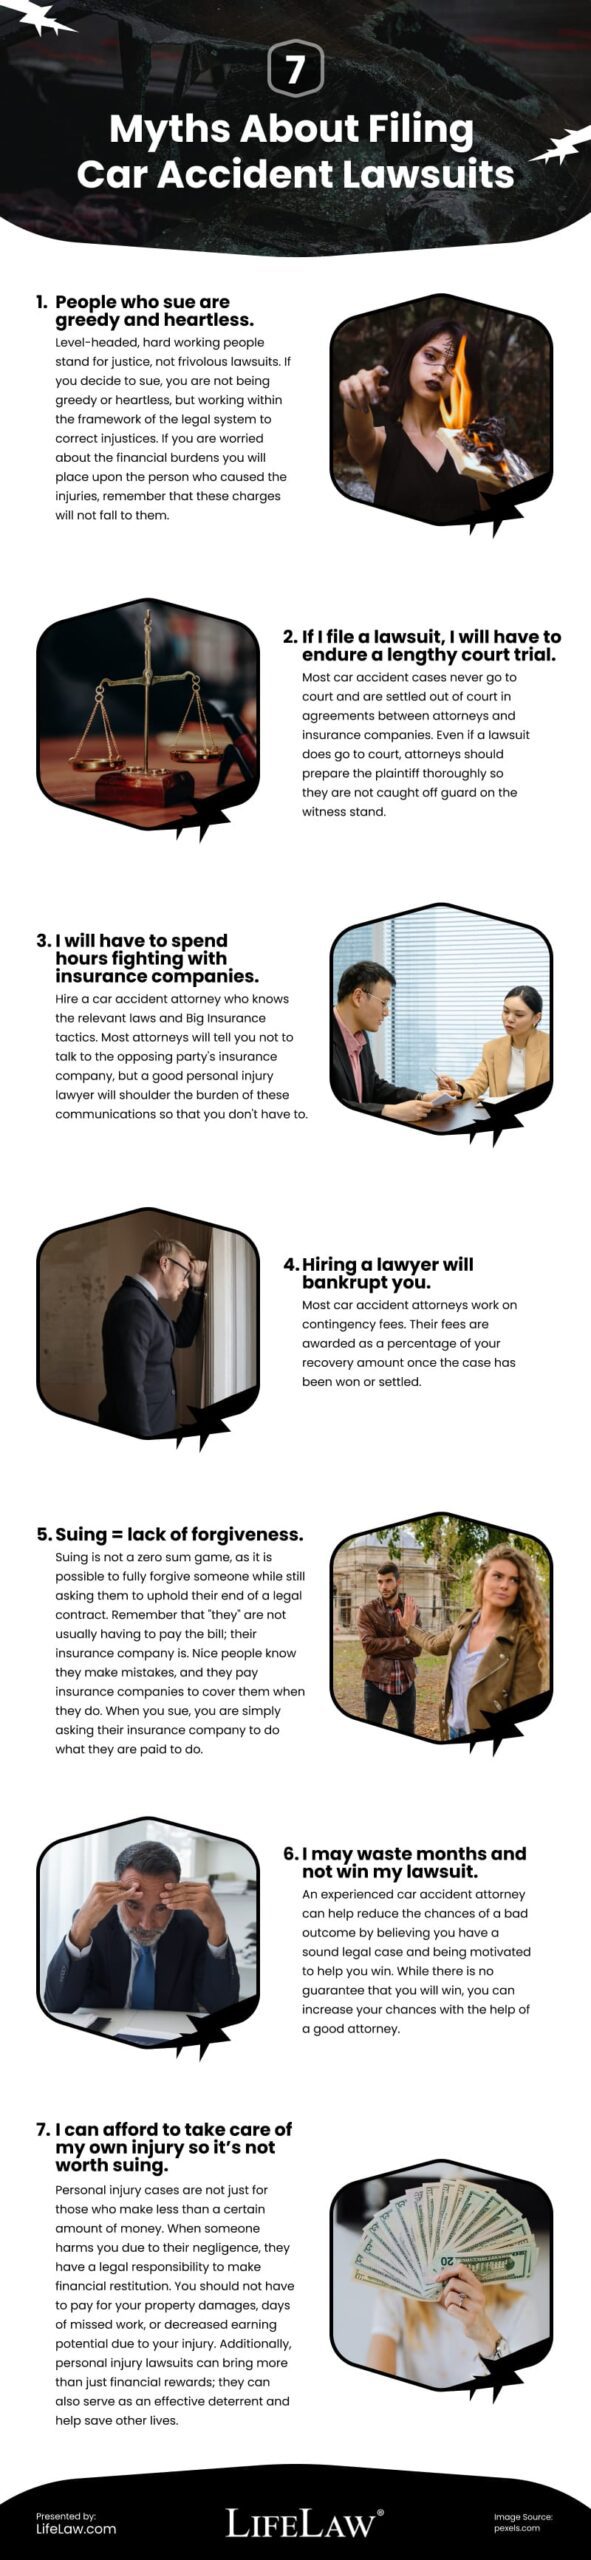 7 Myths About Filing Car Accident Lawsuits Infographic